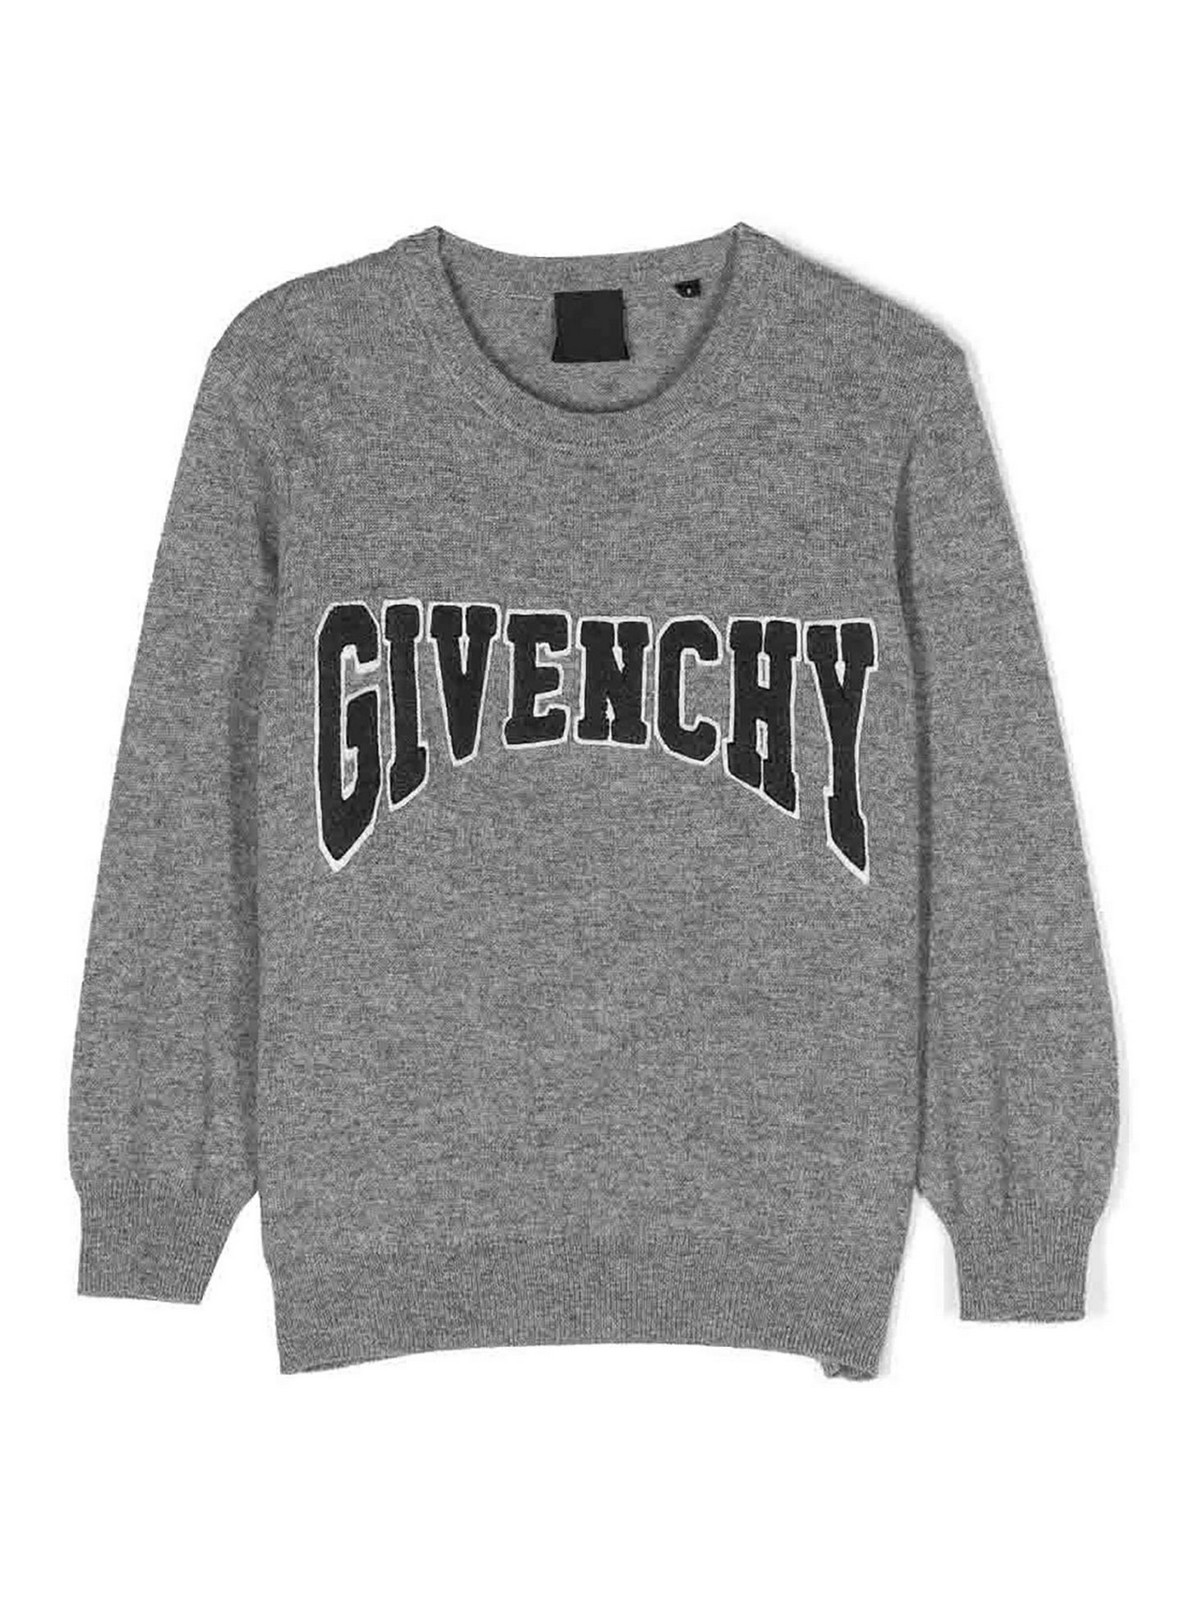 GIVENCHY GREY CASHMERE AND WOOL BOY GIVENCHY JUMPER